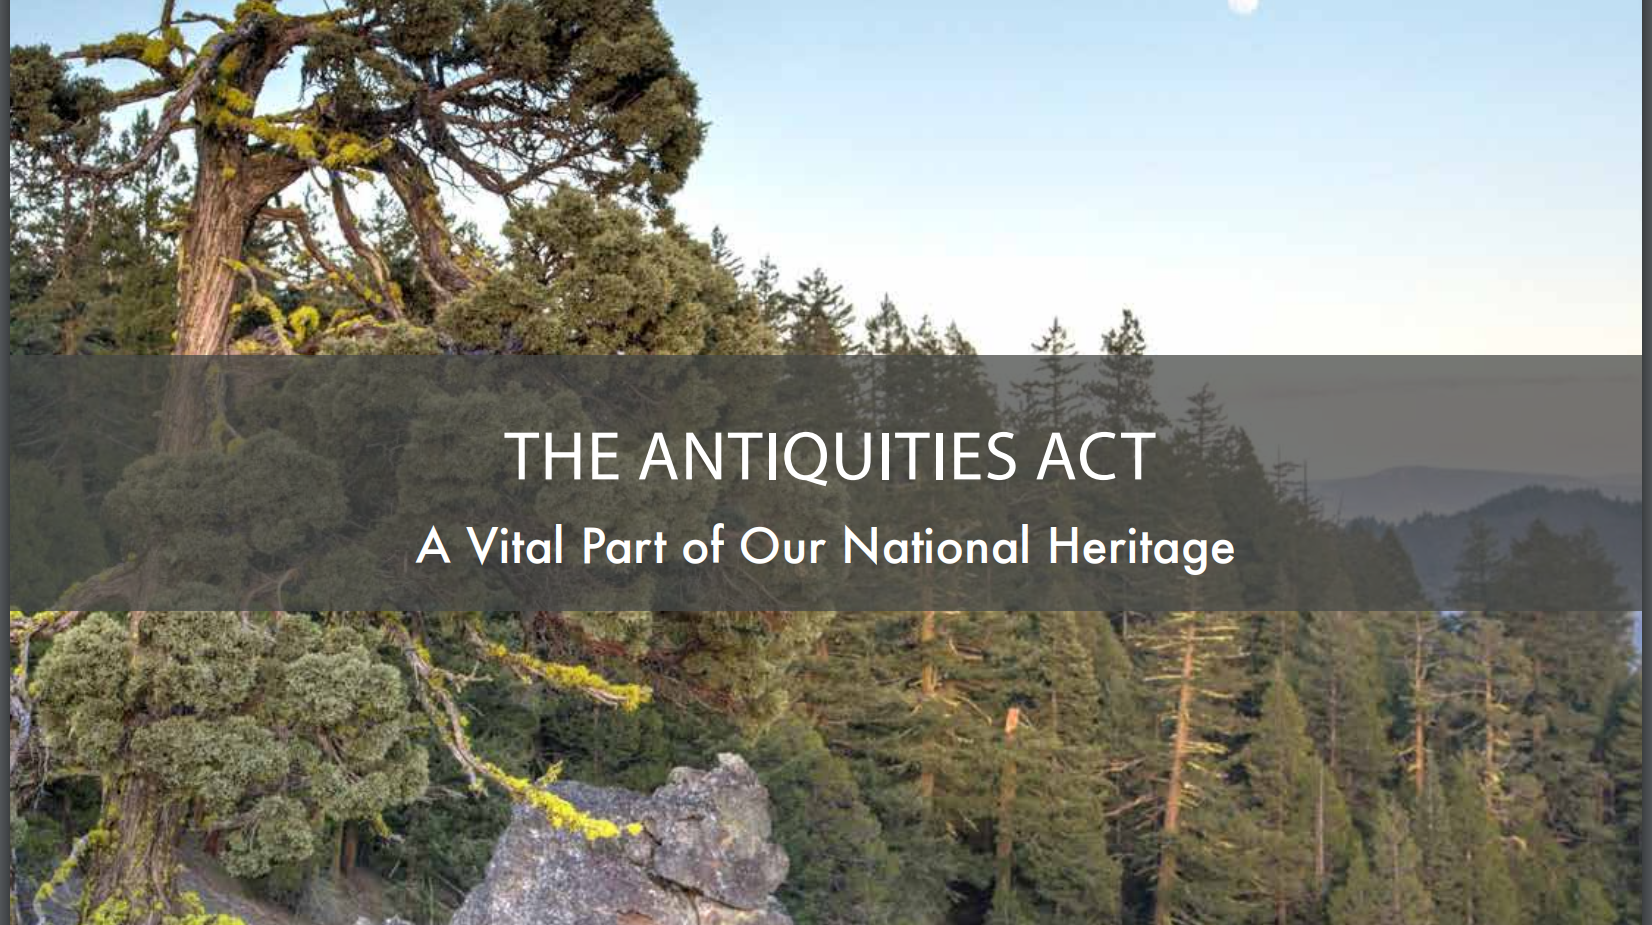 Preserving the Antiquities Act